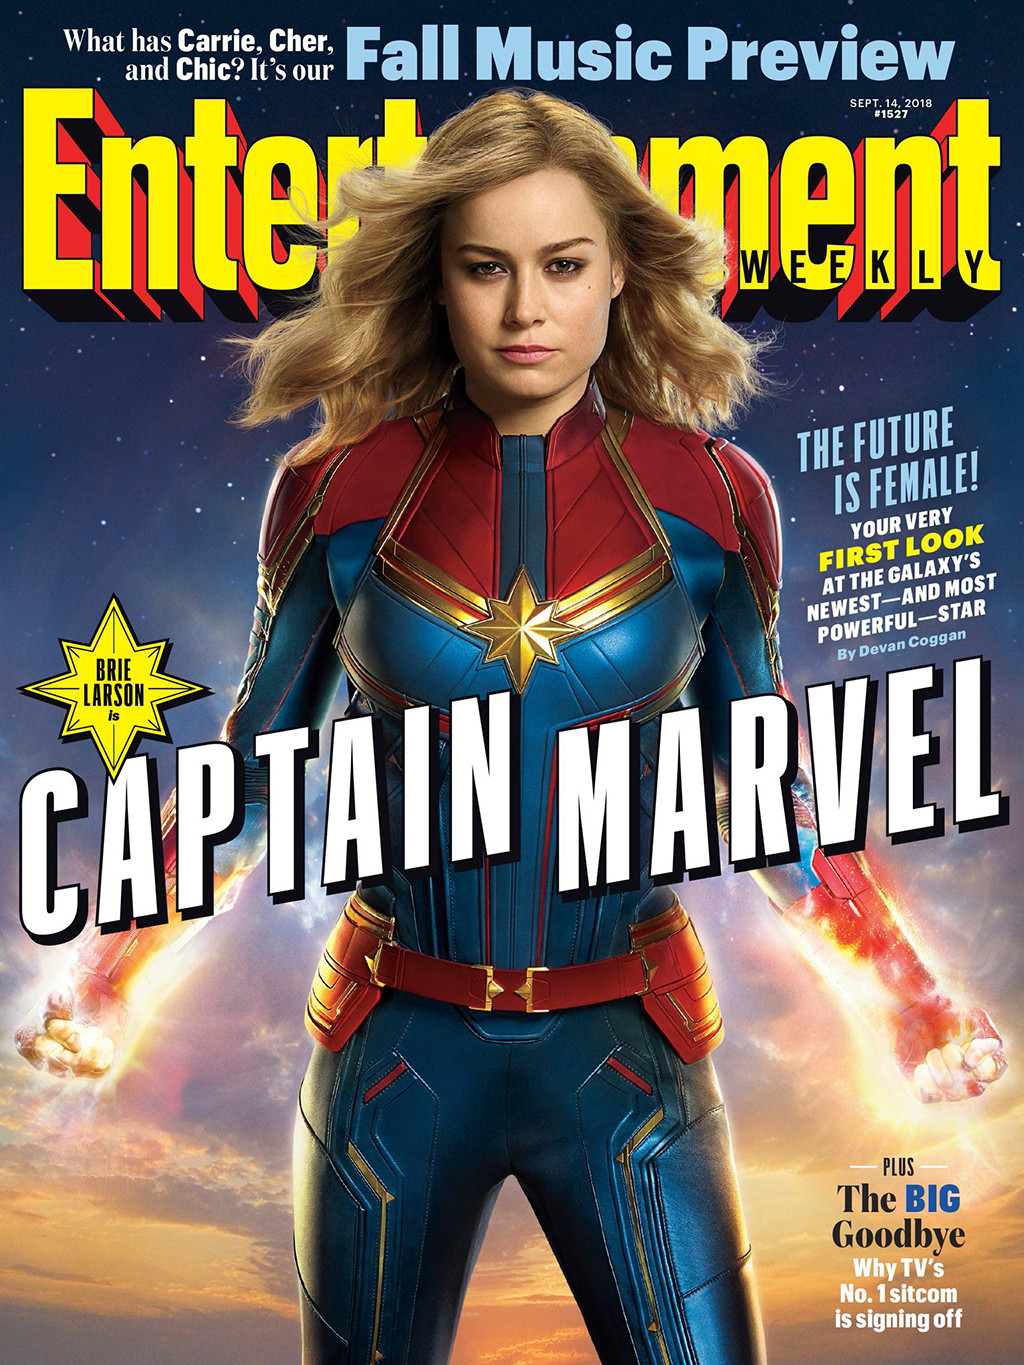 Brie Larson Looks Powerful in Captain Marvel First Look - E! Online